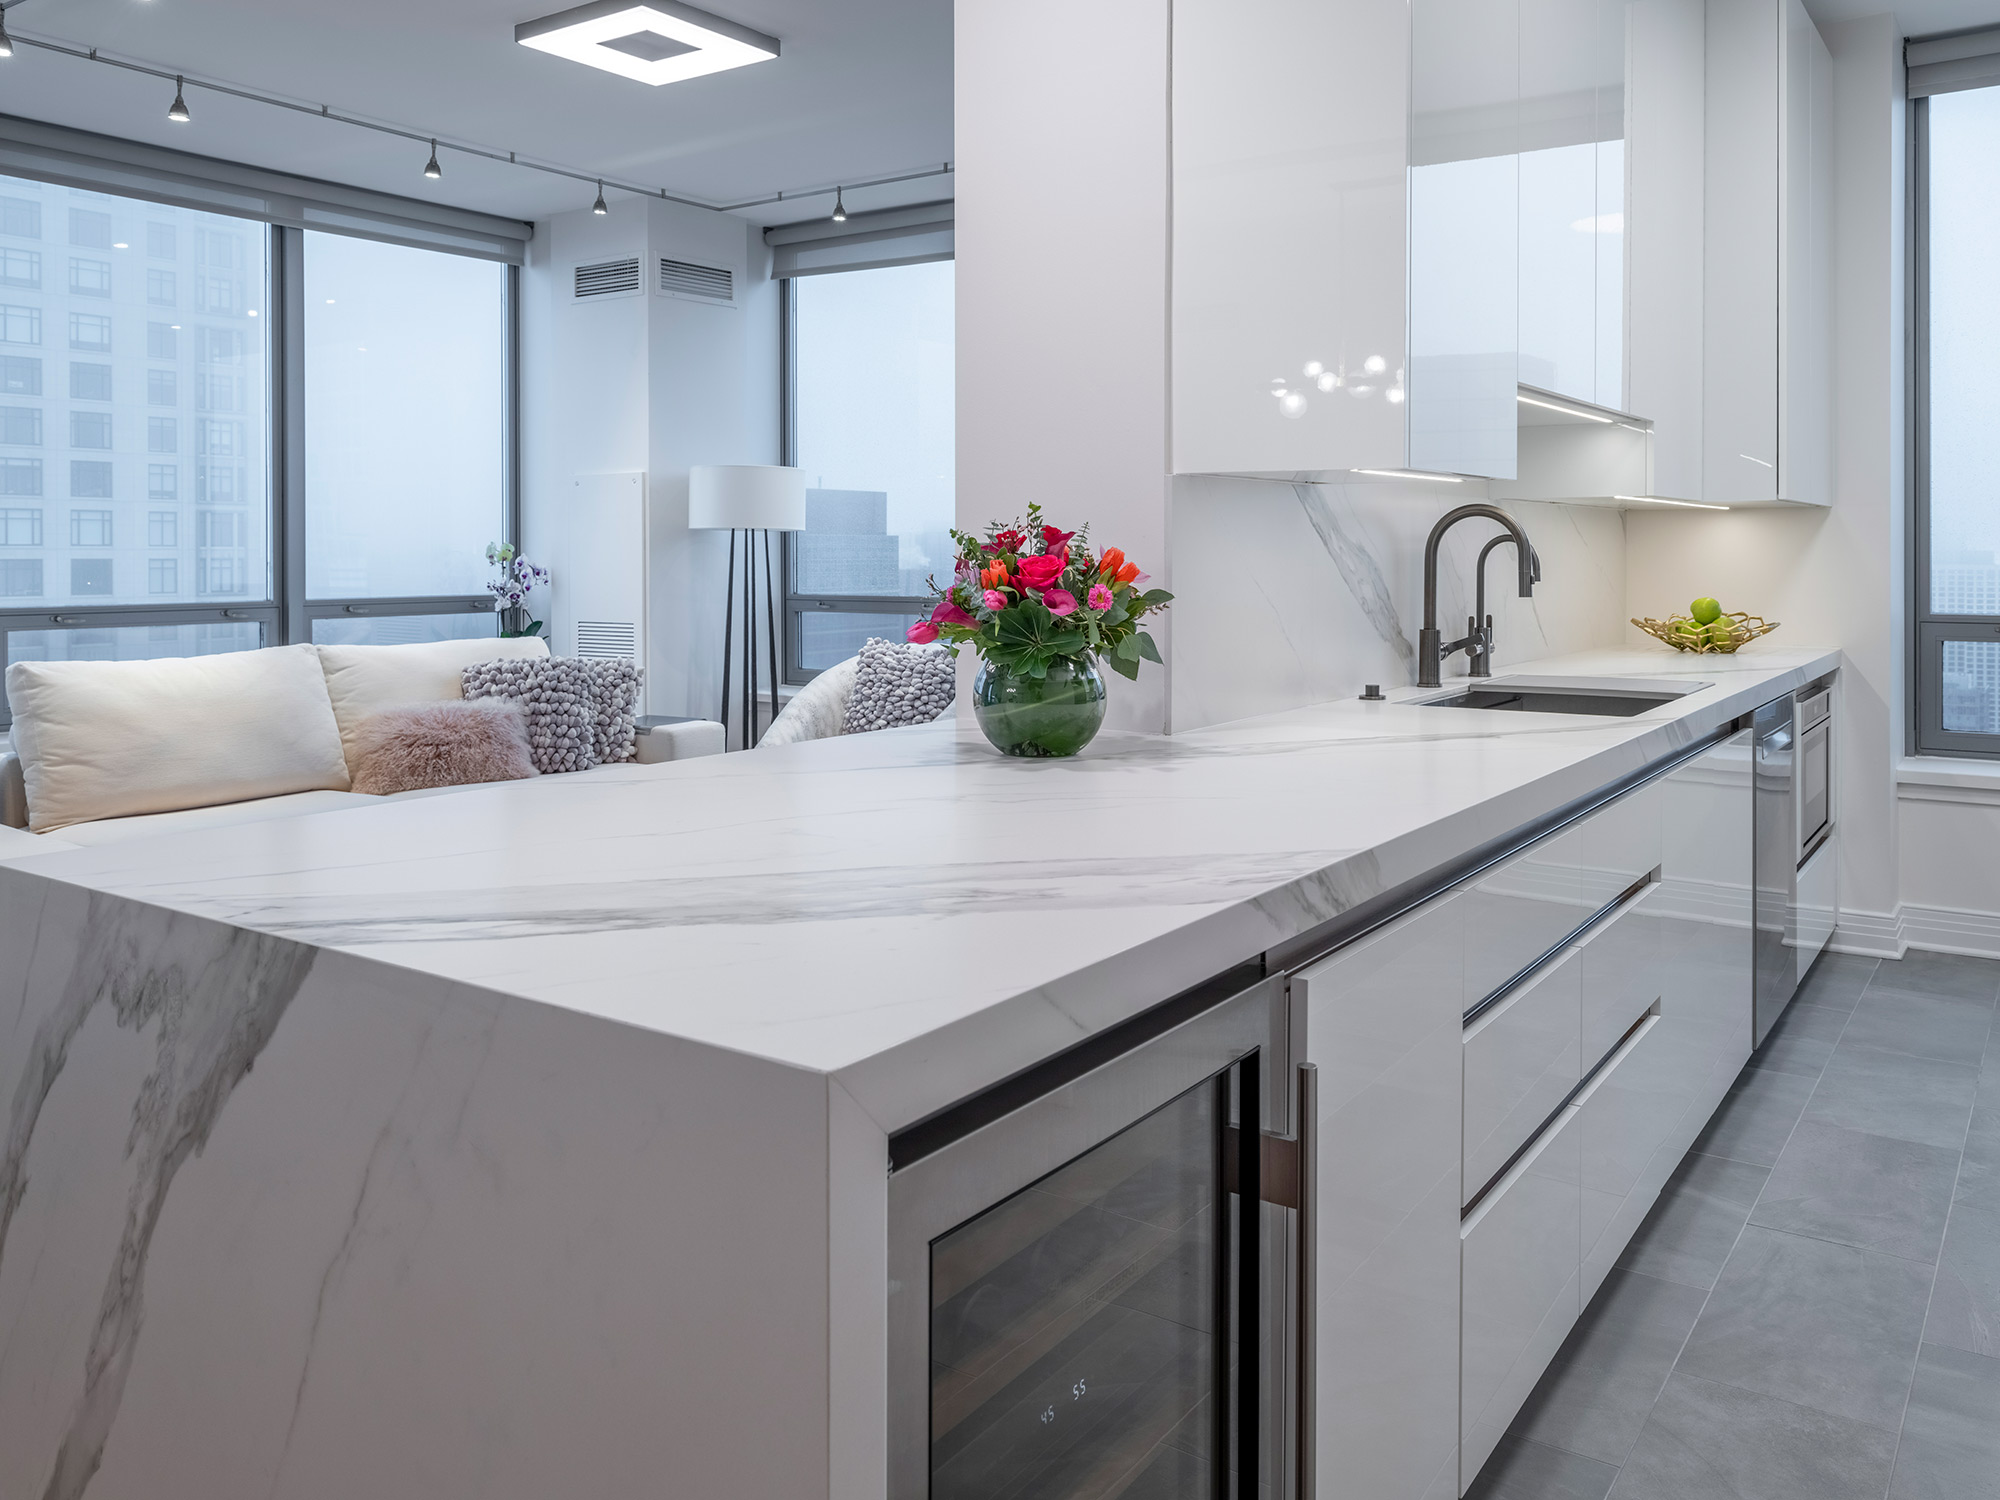 Image of Lake Shore Drive 7 in Dekton Opera brings timeless and natural design to this Chicago home  - Cosentino